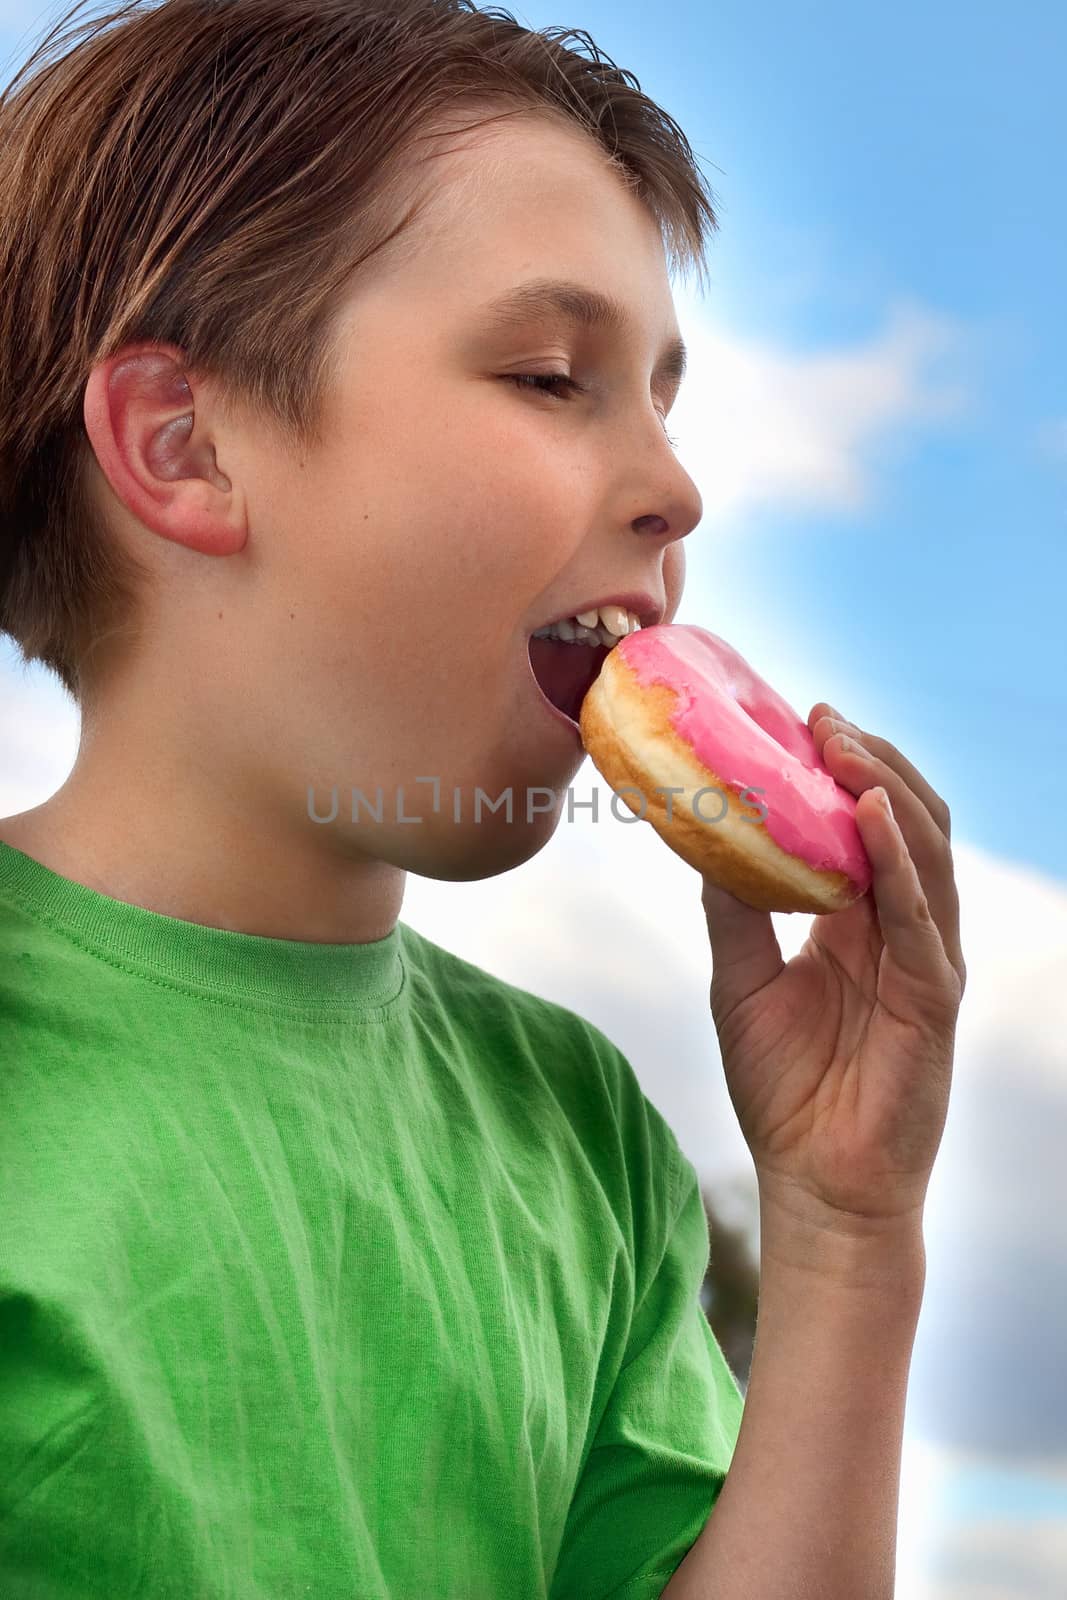 A hungry young child biting a pink strawberry iced doughnut.   He is wearing a green t-shirt.  Sky and clouds background